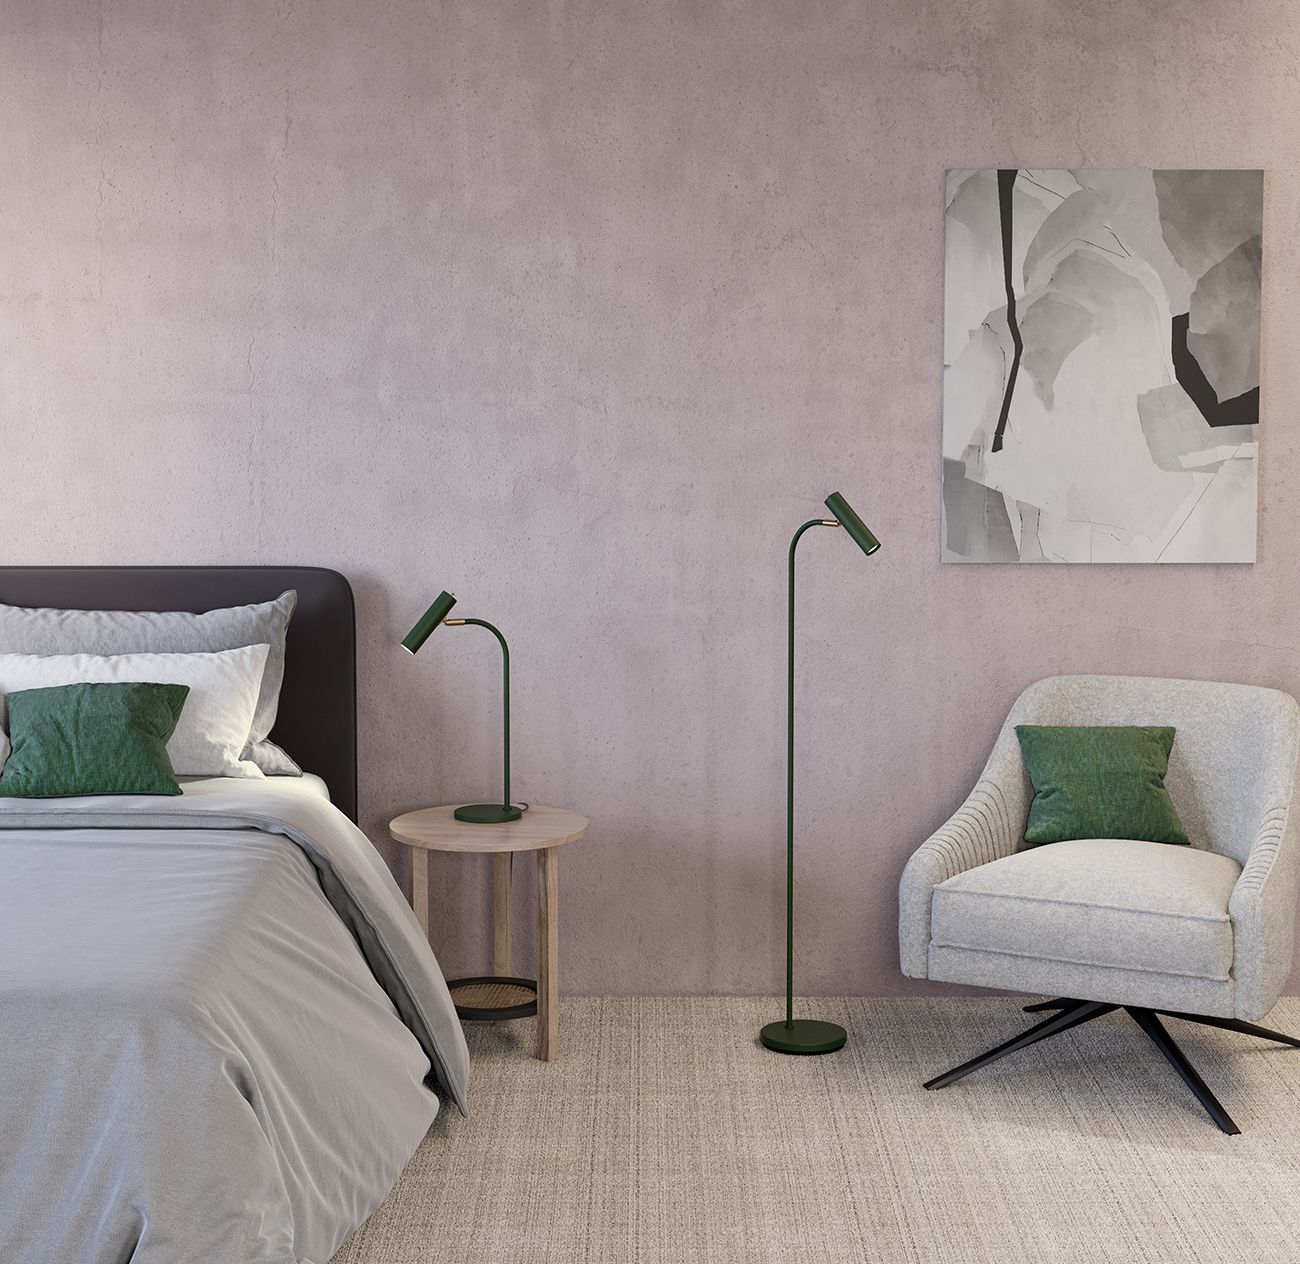 Slender floor lamp and table lamp in the bedroom 